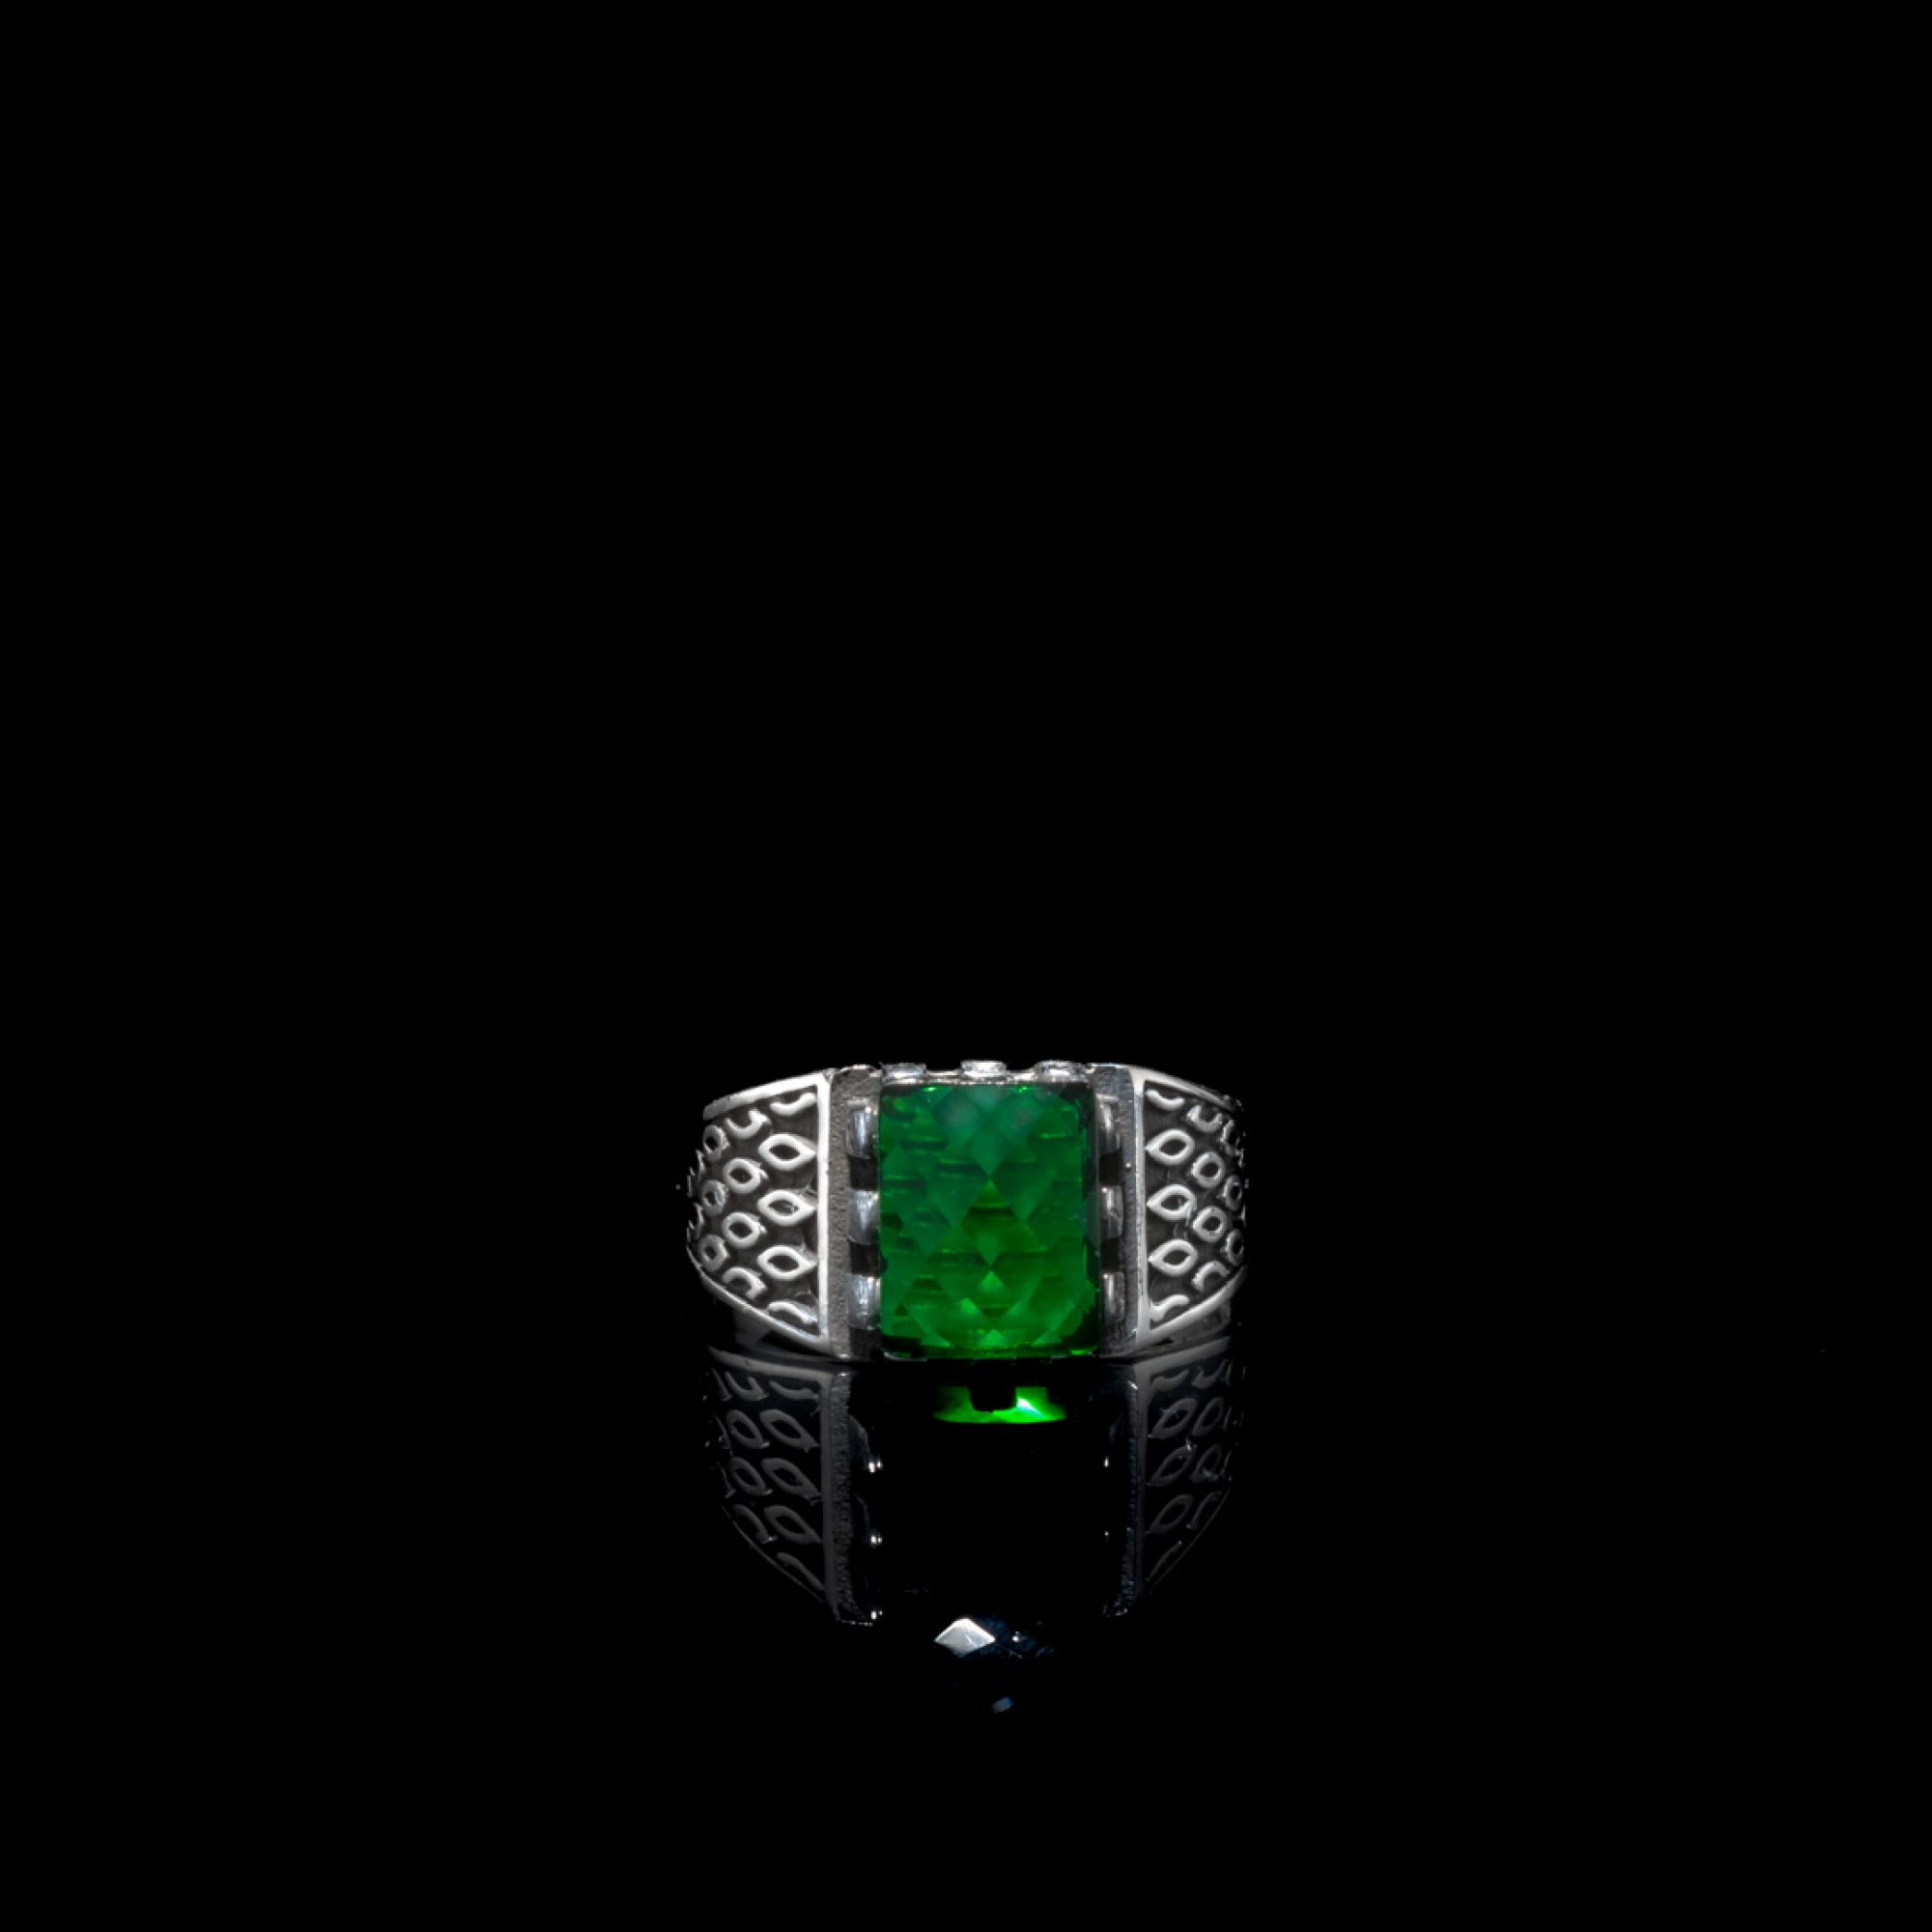 Silver ring with emerald stone